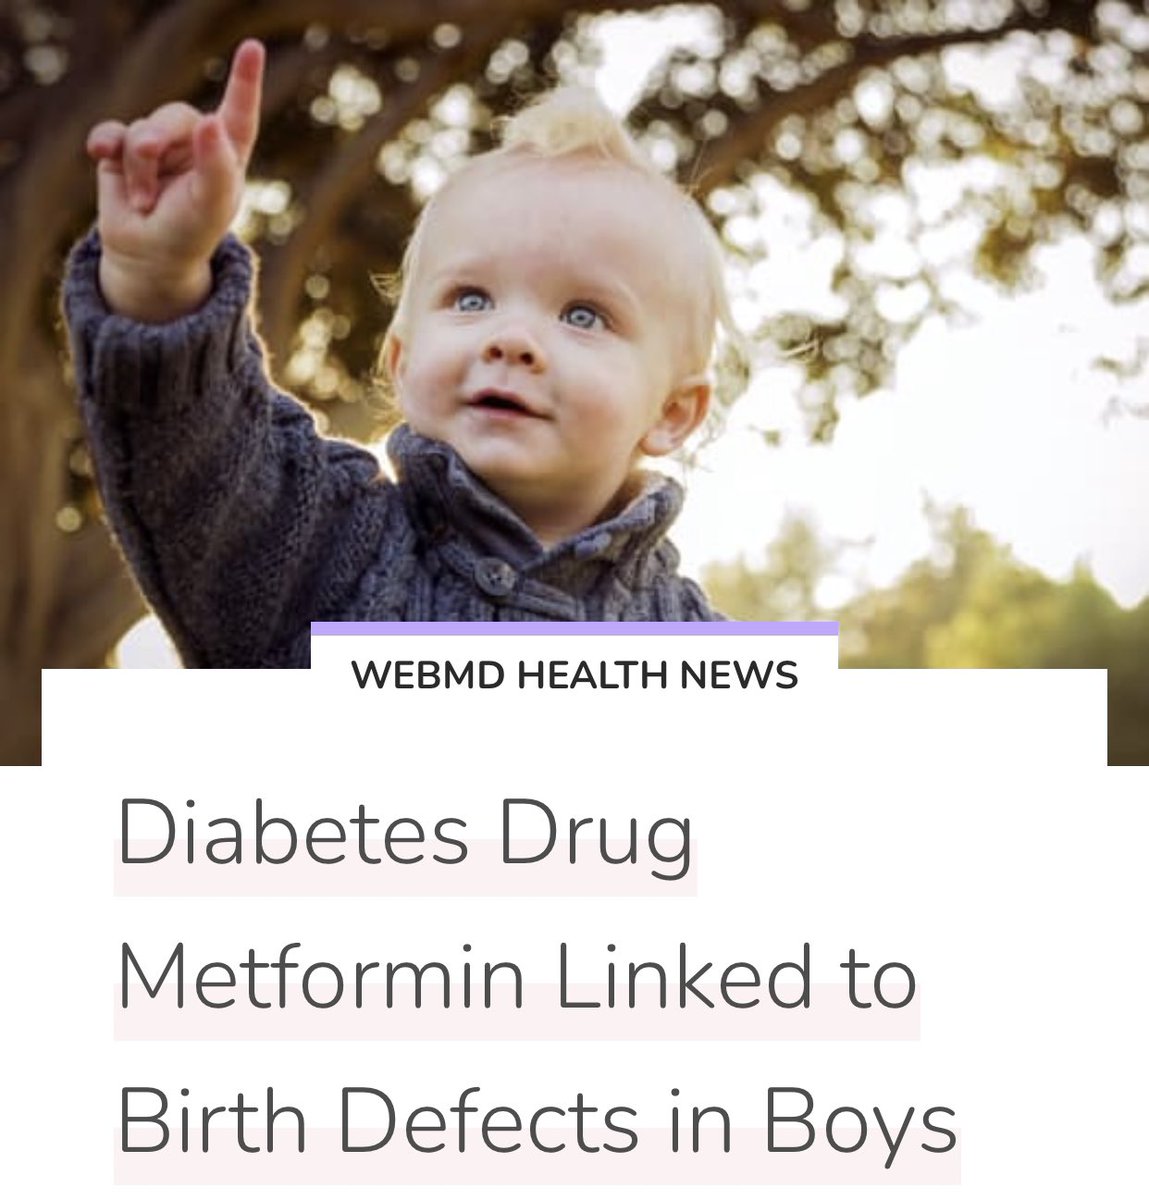 1/ This is why new drugs should not be released without rigorous safety tests. A 3-4 fold increase in major birth defects of the genitals and urinary tract is just NOW being discovered in the data, even though Metformin was FDA approved in 1995 —>85 million prescriptions later!!!